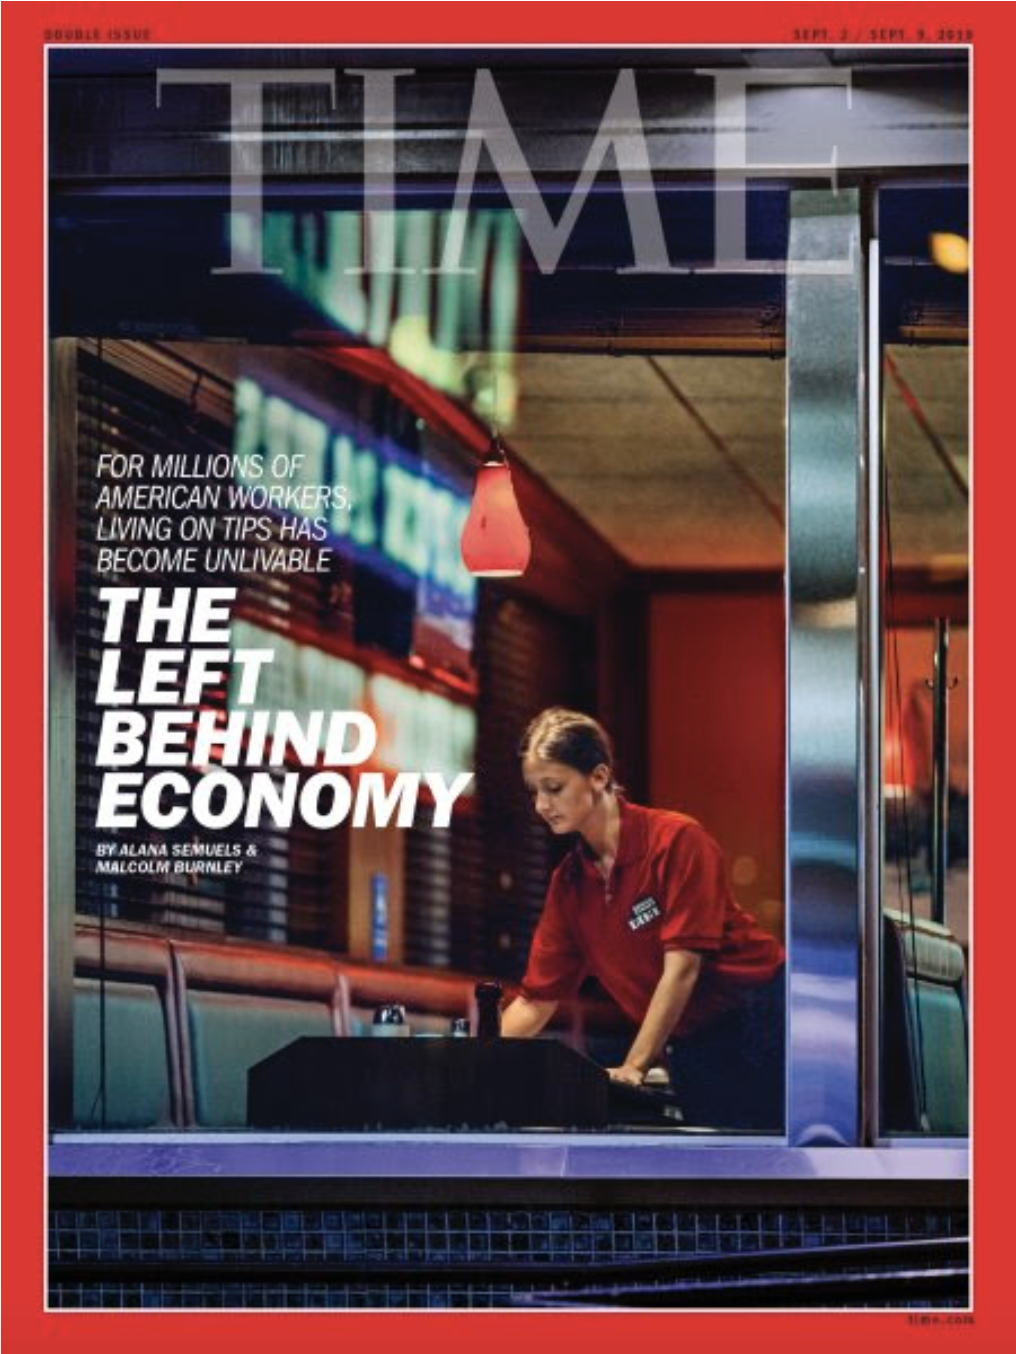 Restaurant Workers are on the Cover of Time Magazine